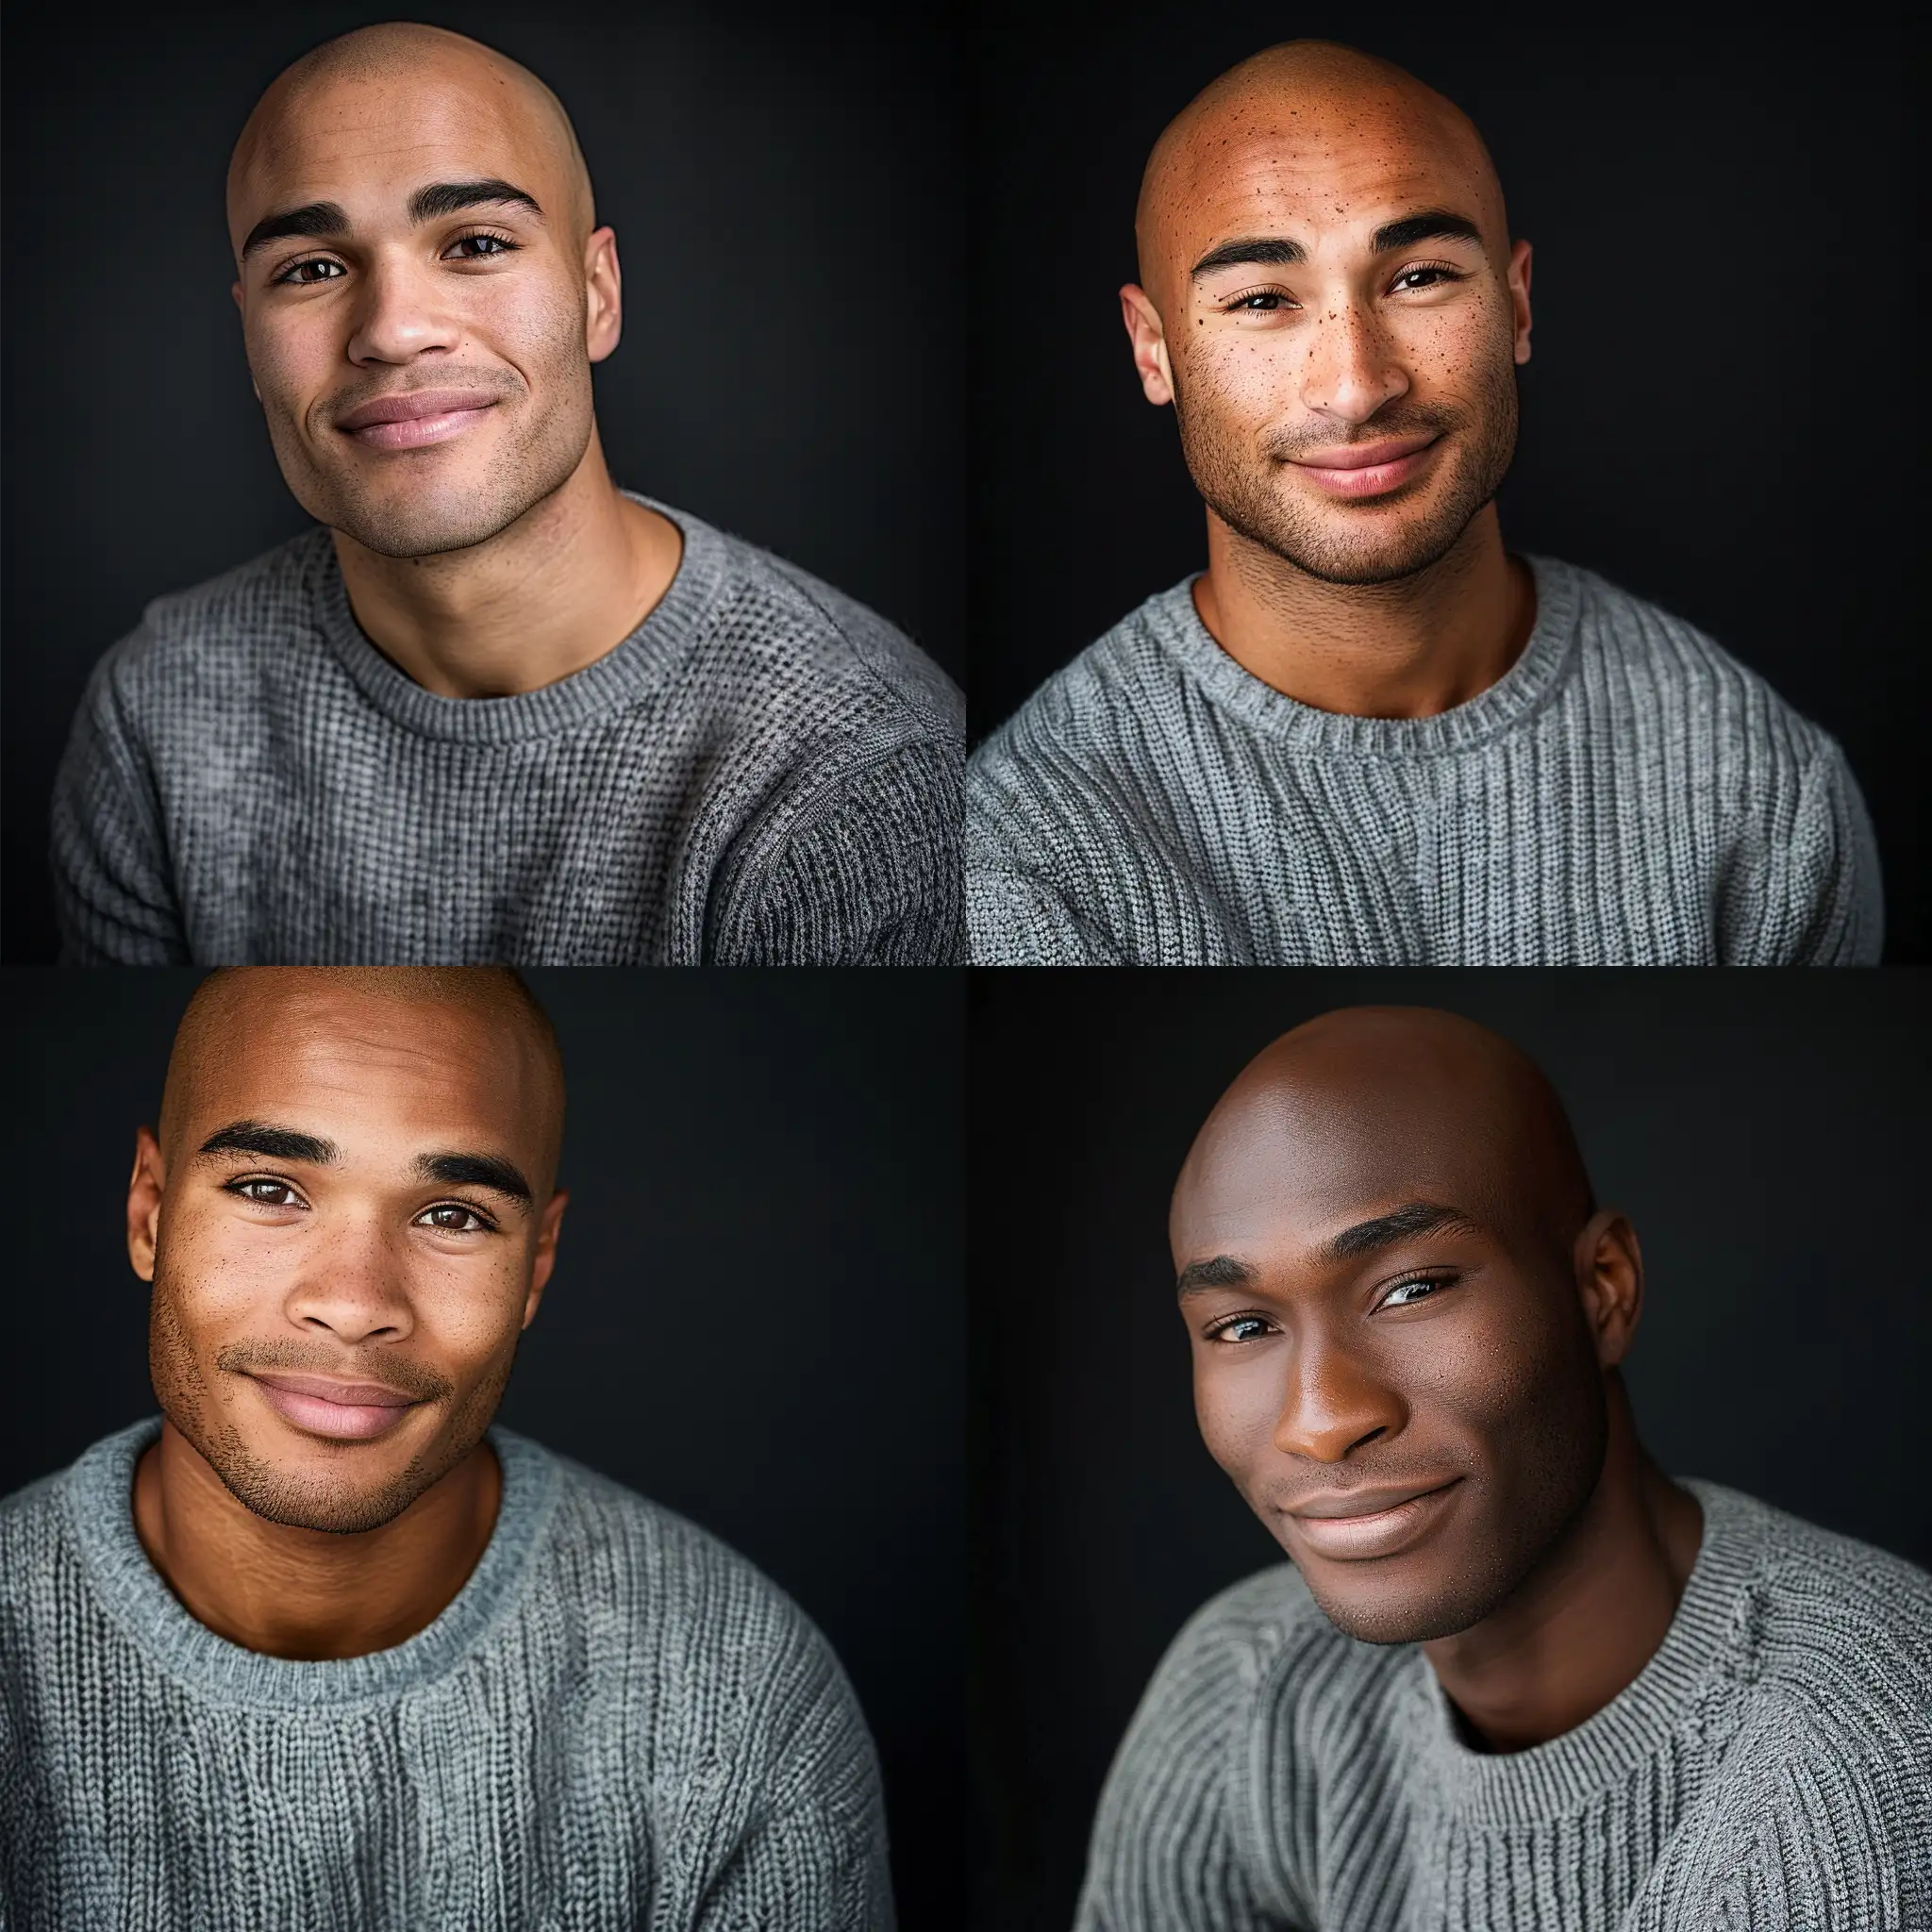 BronzeSkinned-Man-in-Grey-Sweater-Smiling-for-Canon-Camera-Portrait